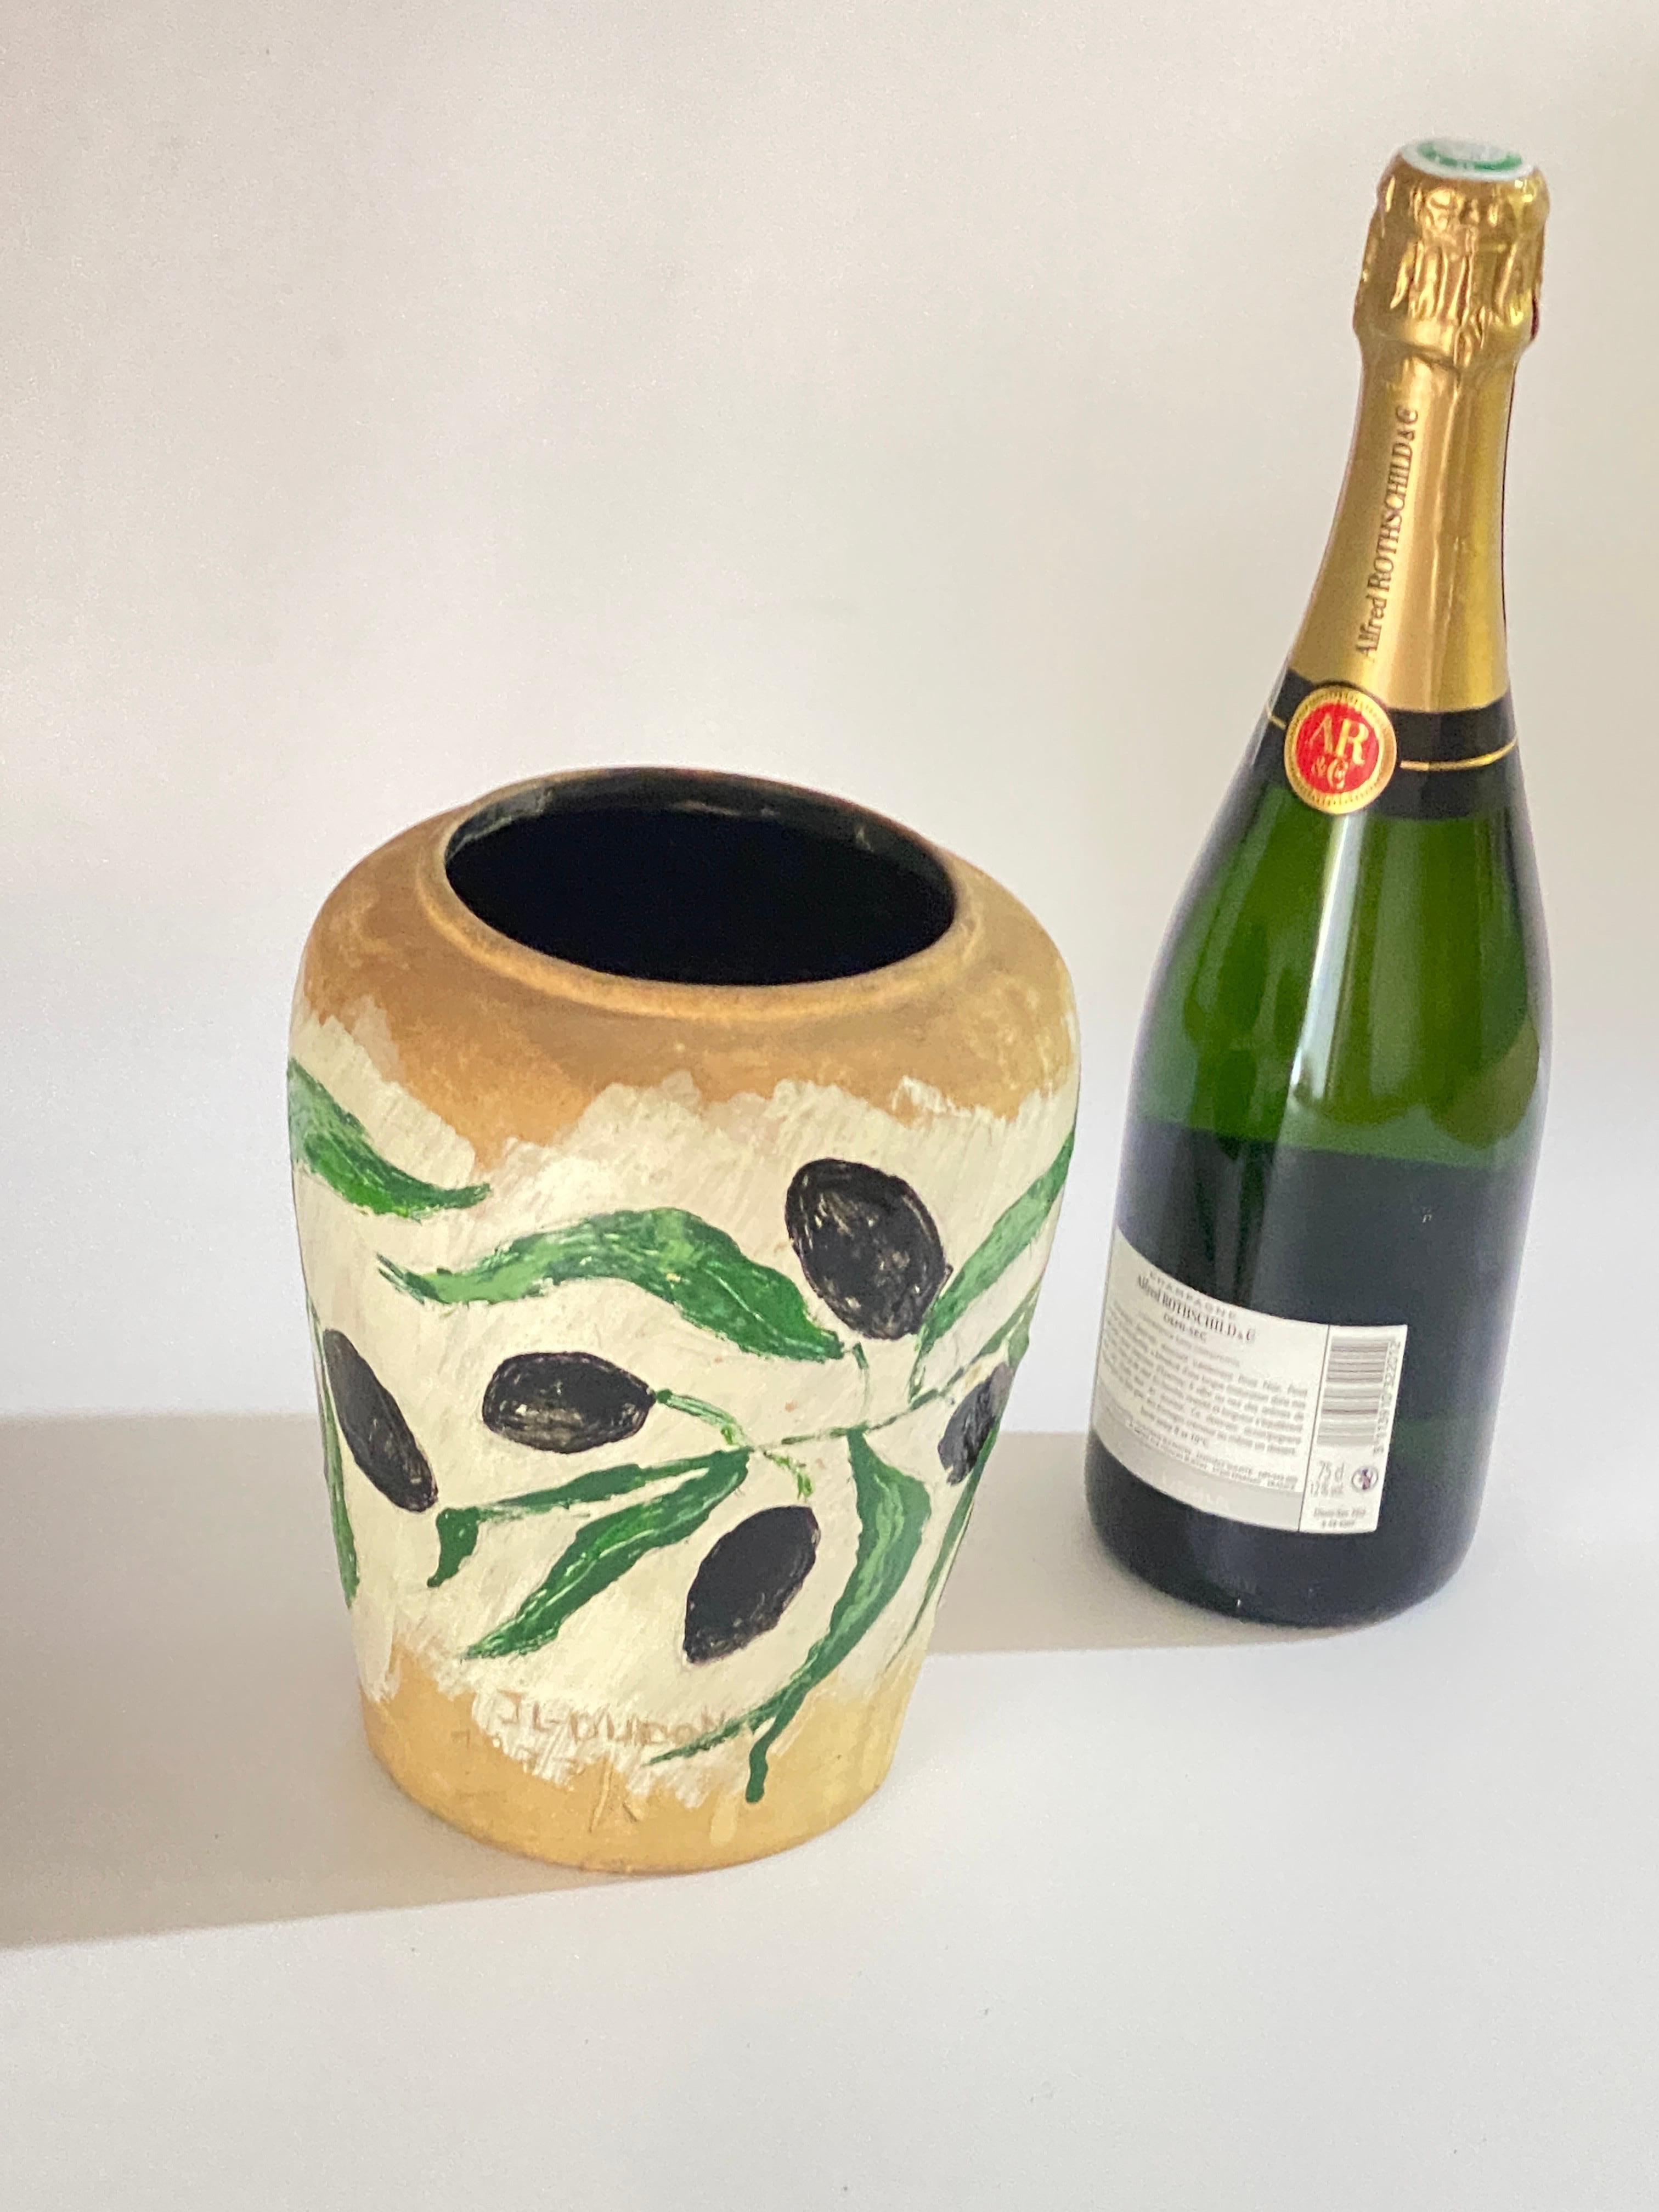 It is a ceramic vase, which has been painted by hand. It is signed by the artist, and dated 1977. This vase was made in Vallauris in France, in the care of the 70s and 80s. The dominant colors are white, green and black.